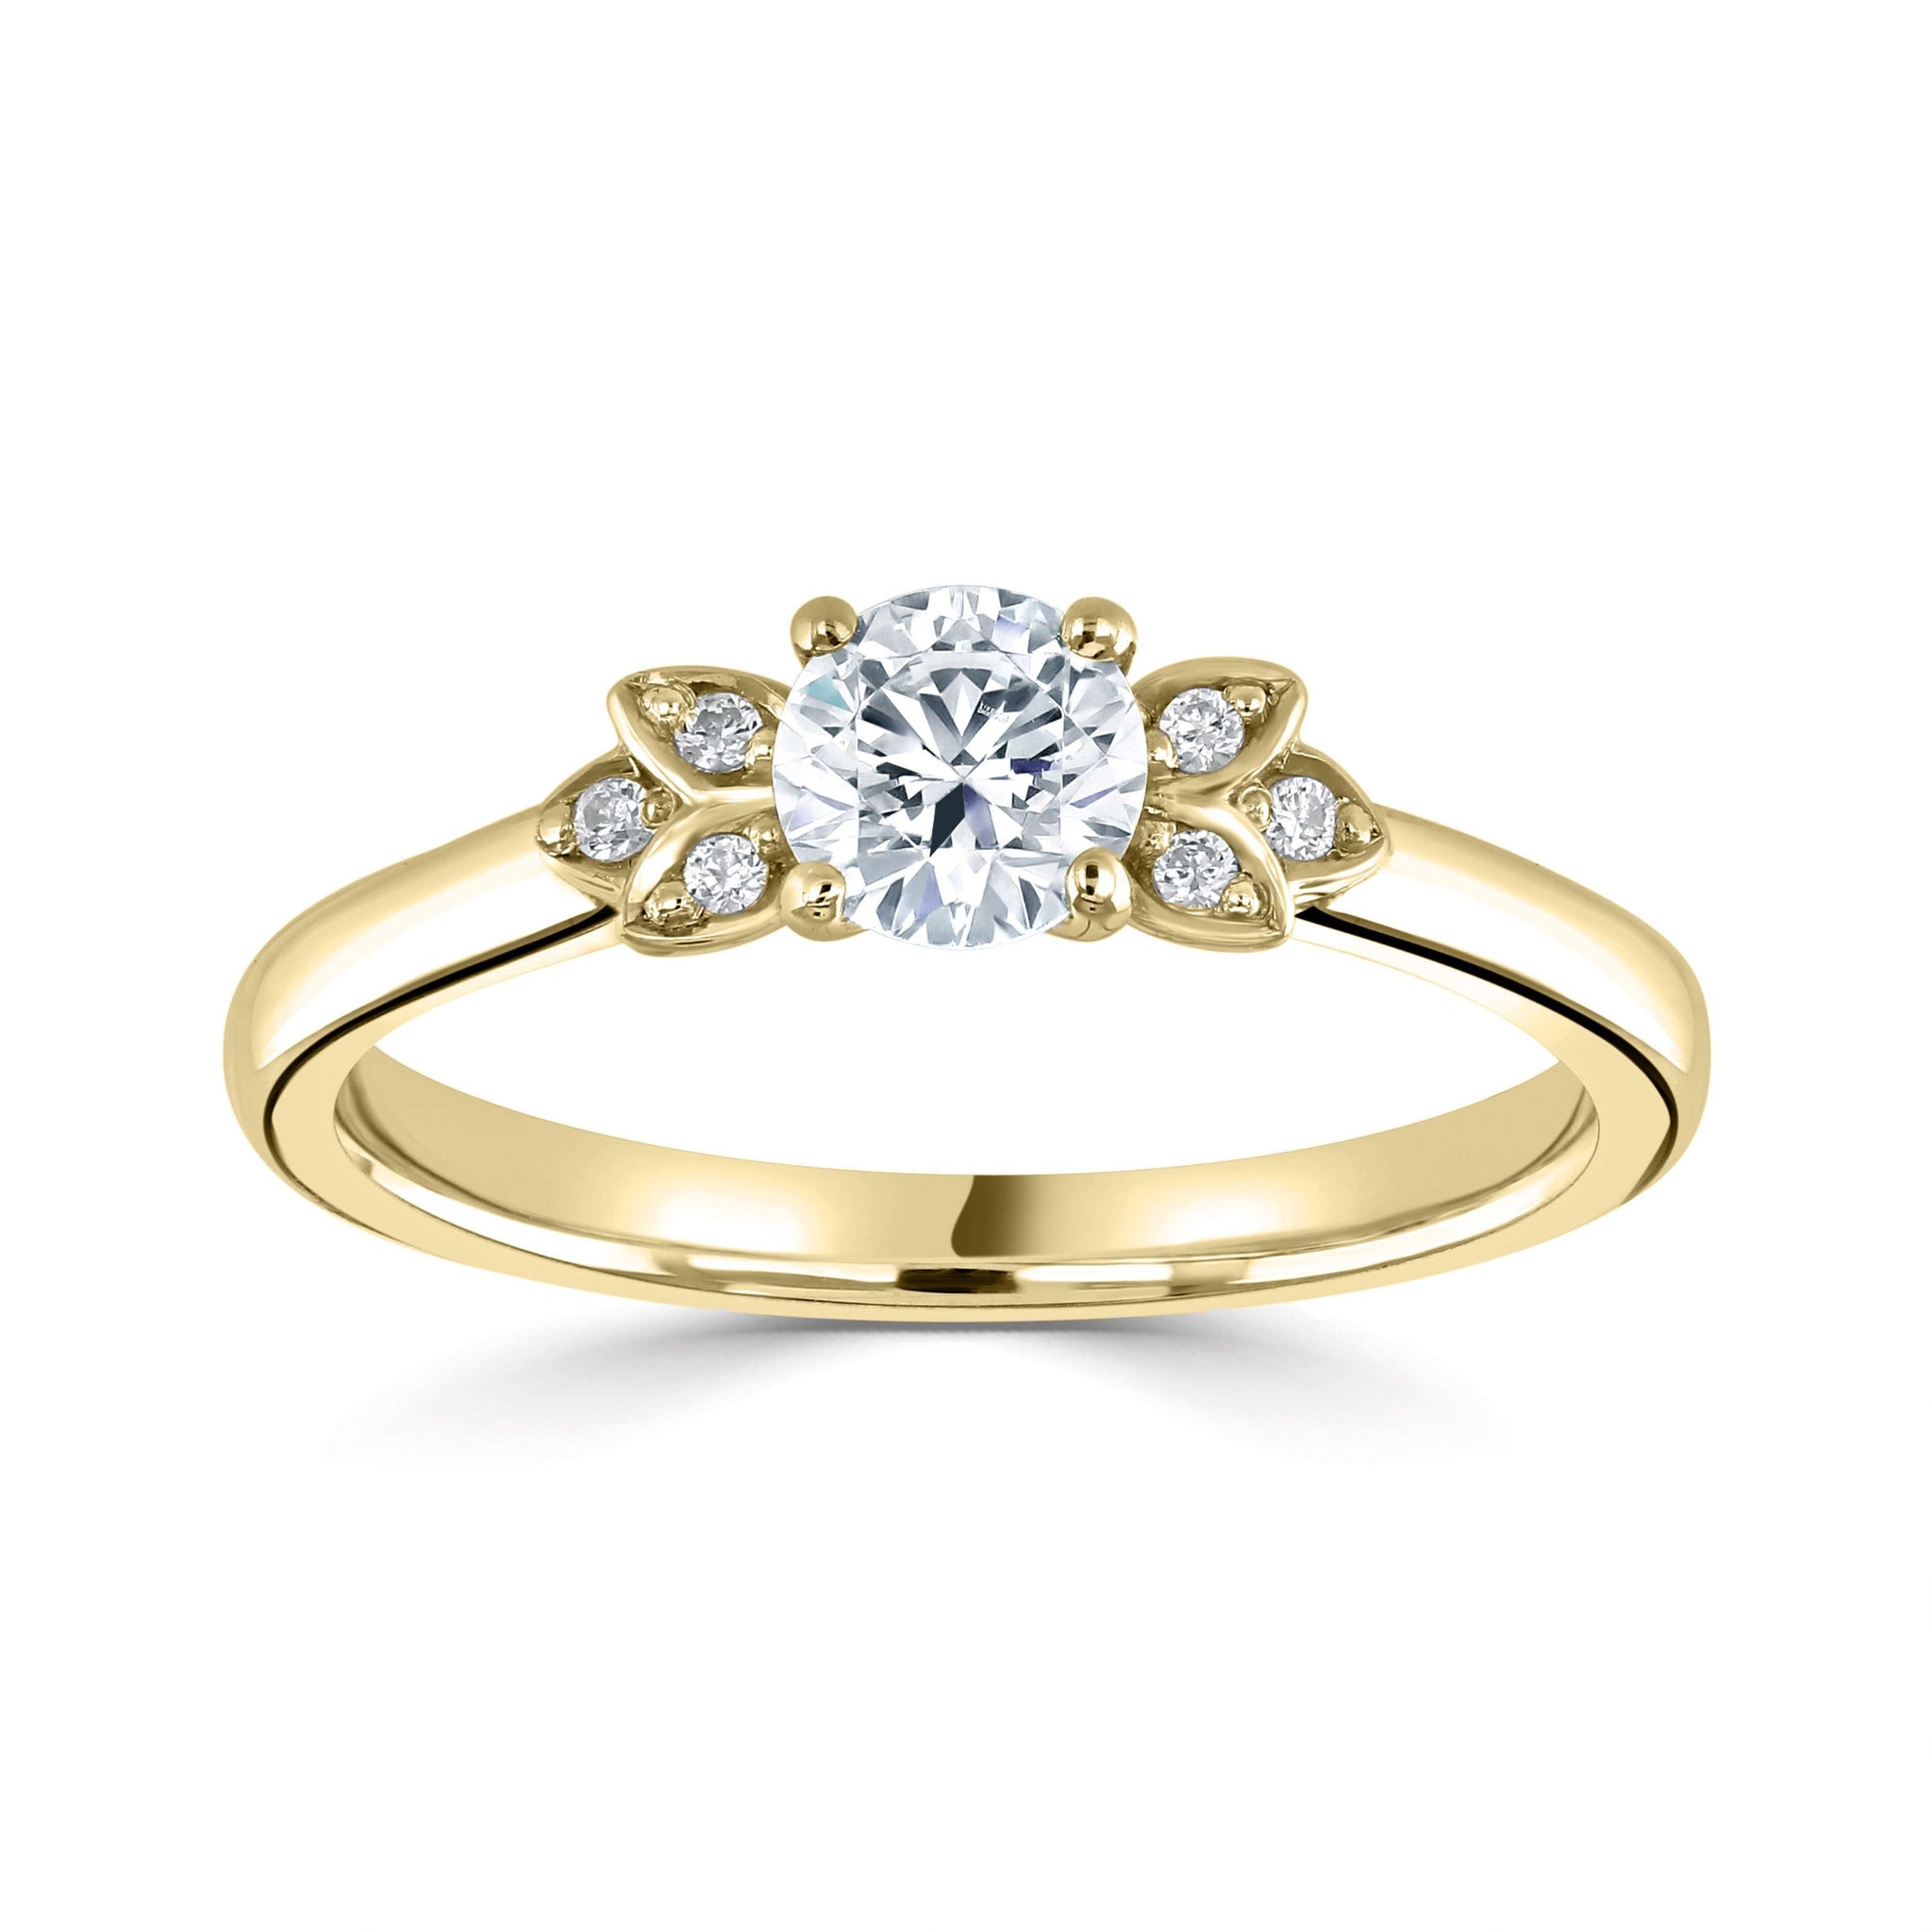 Maeve *Select a Round Diamond 0.25ct or above